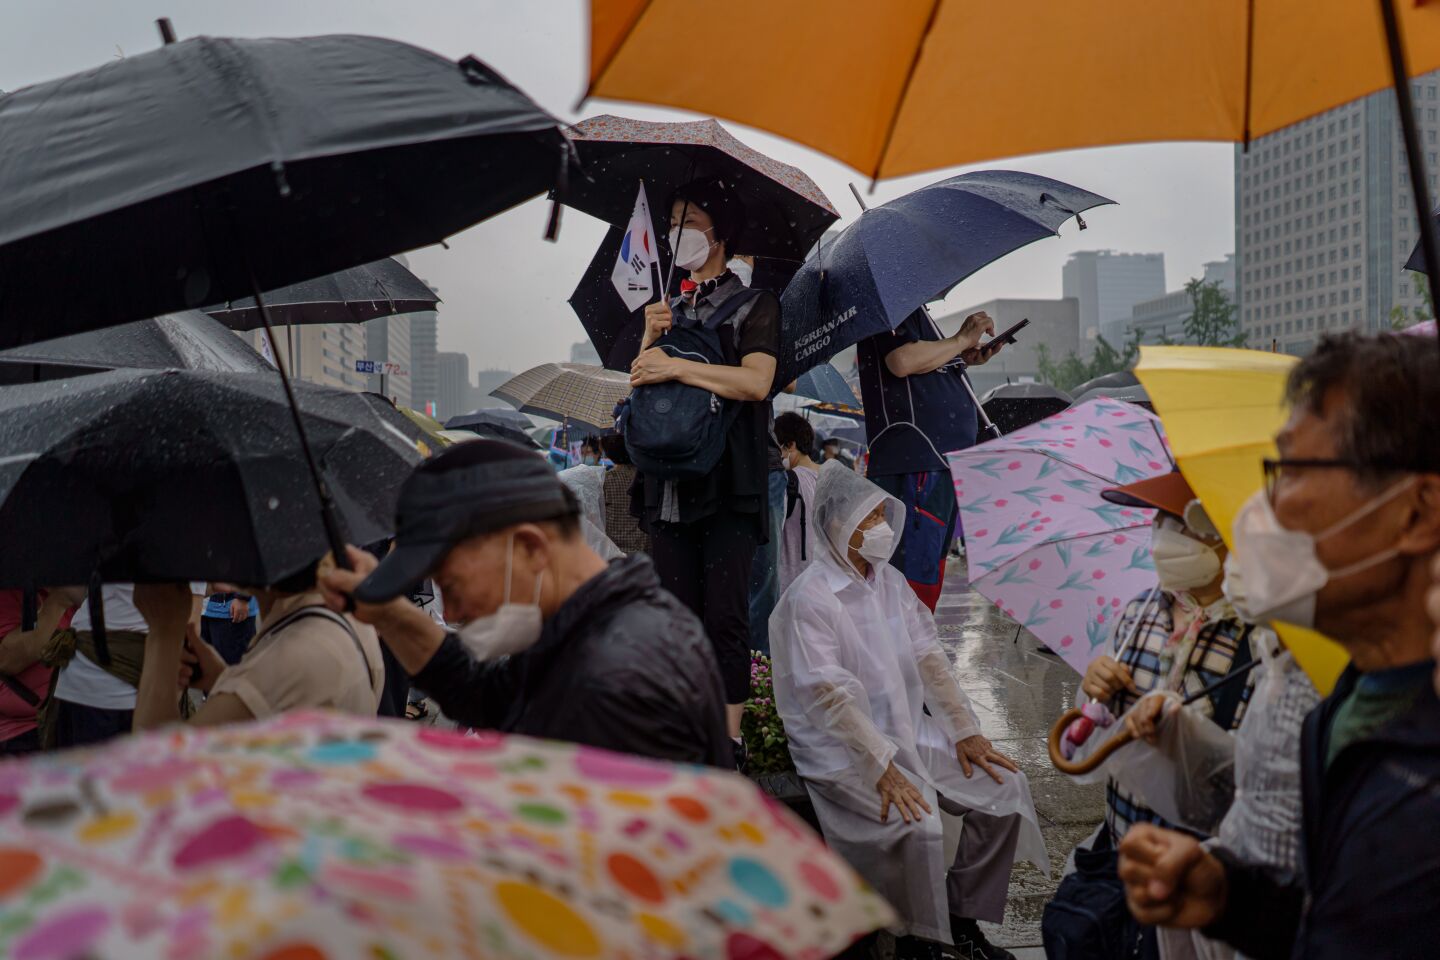 Despite a ban on rallies, religious and civic groups gather to protest the South Korean president's policies.